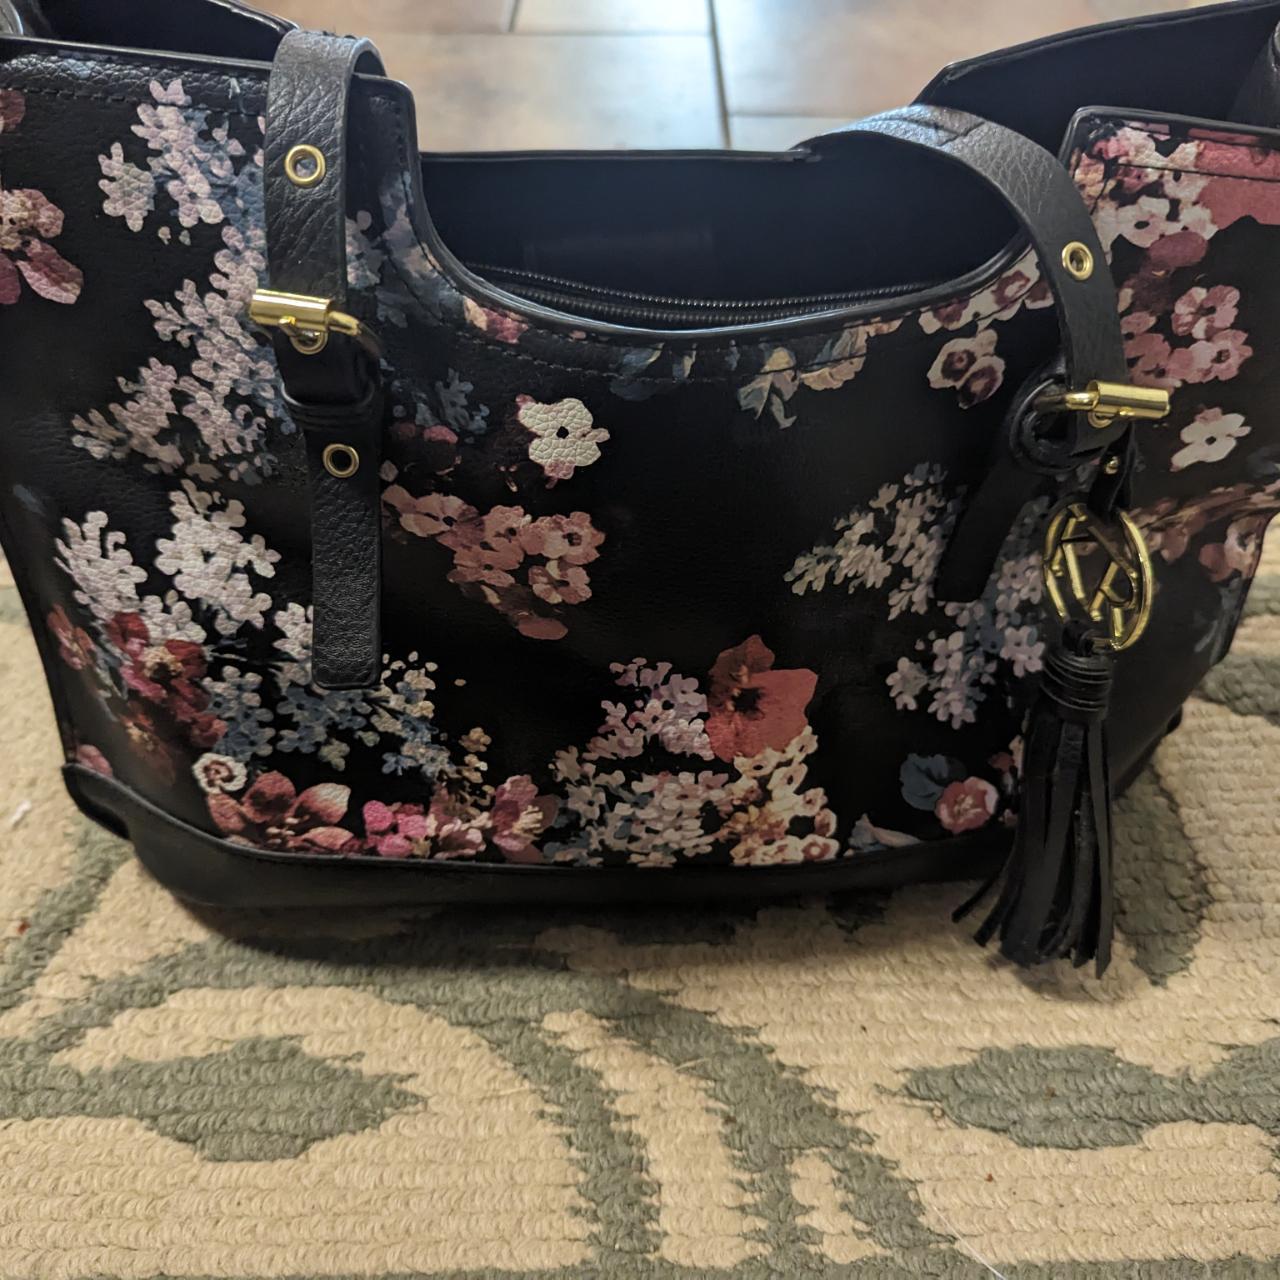 Leather Bueno Floral purse black with pink and... - Depop